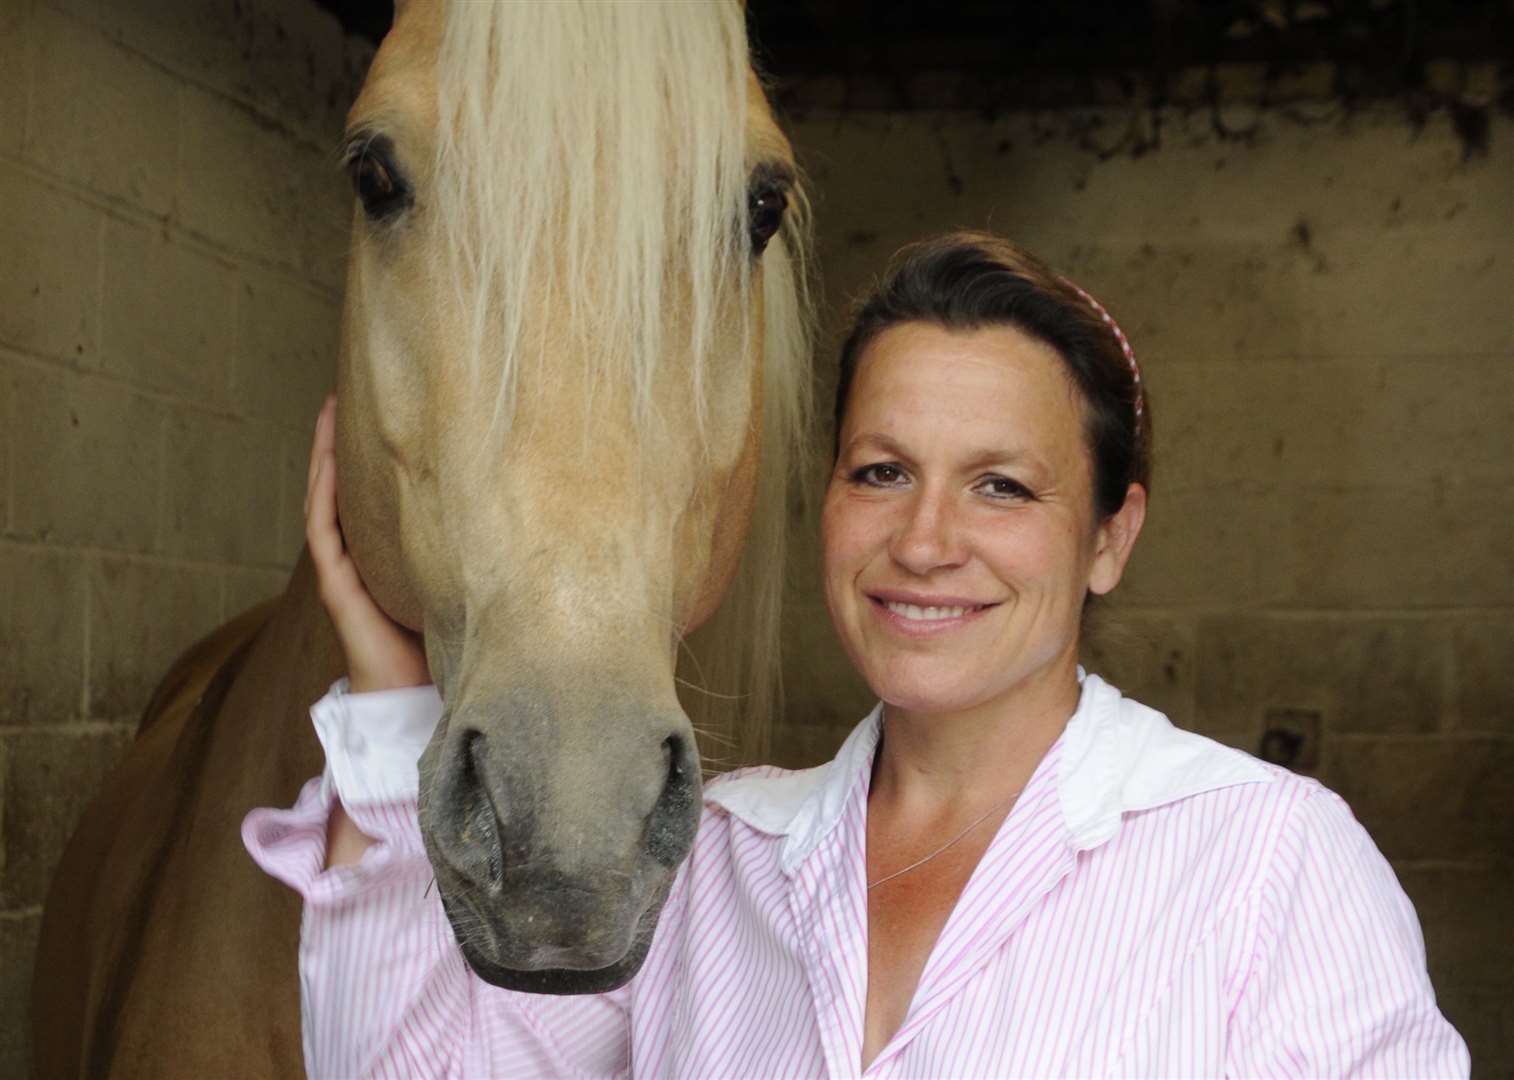 The centre's owner Kate Morris and horse Xadrel at Blue Barn